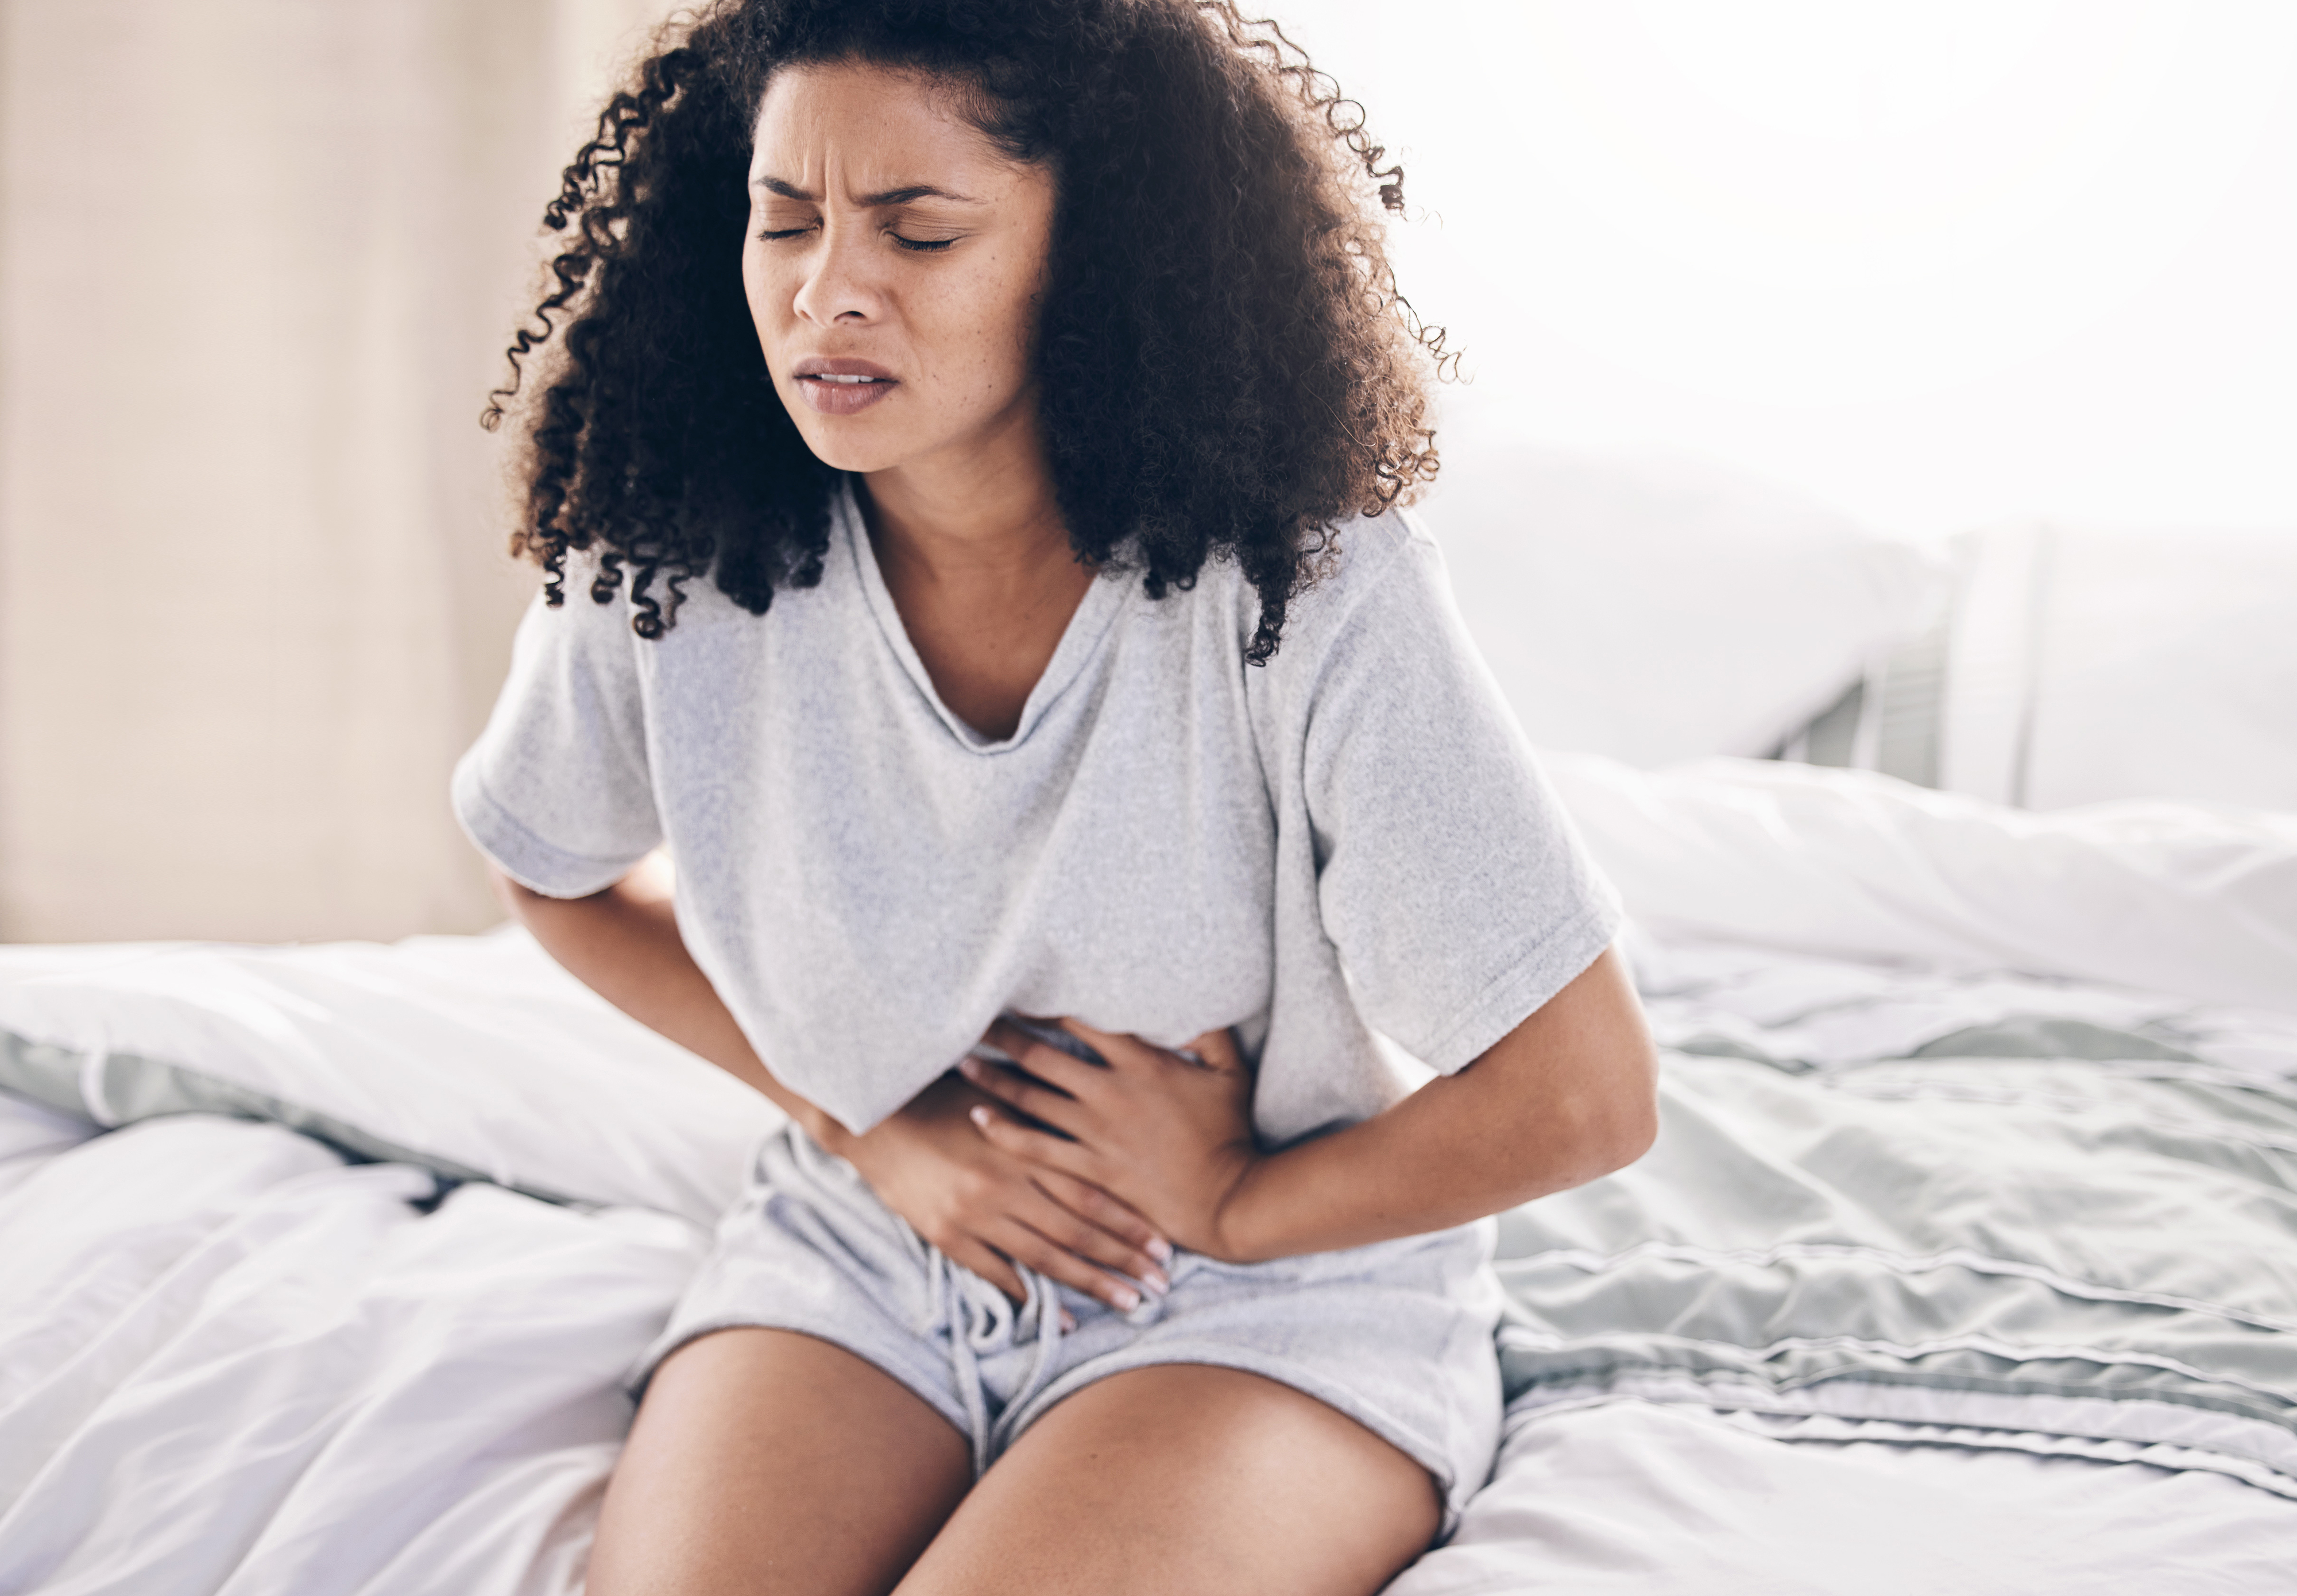 A woman sitting on a bed and clutching her stomach in pain